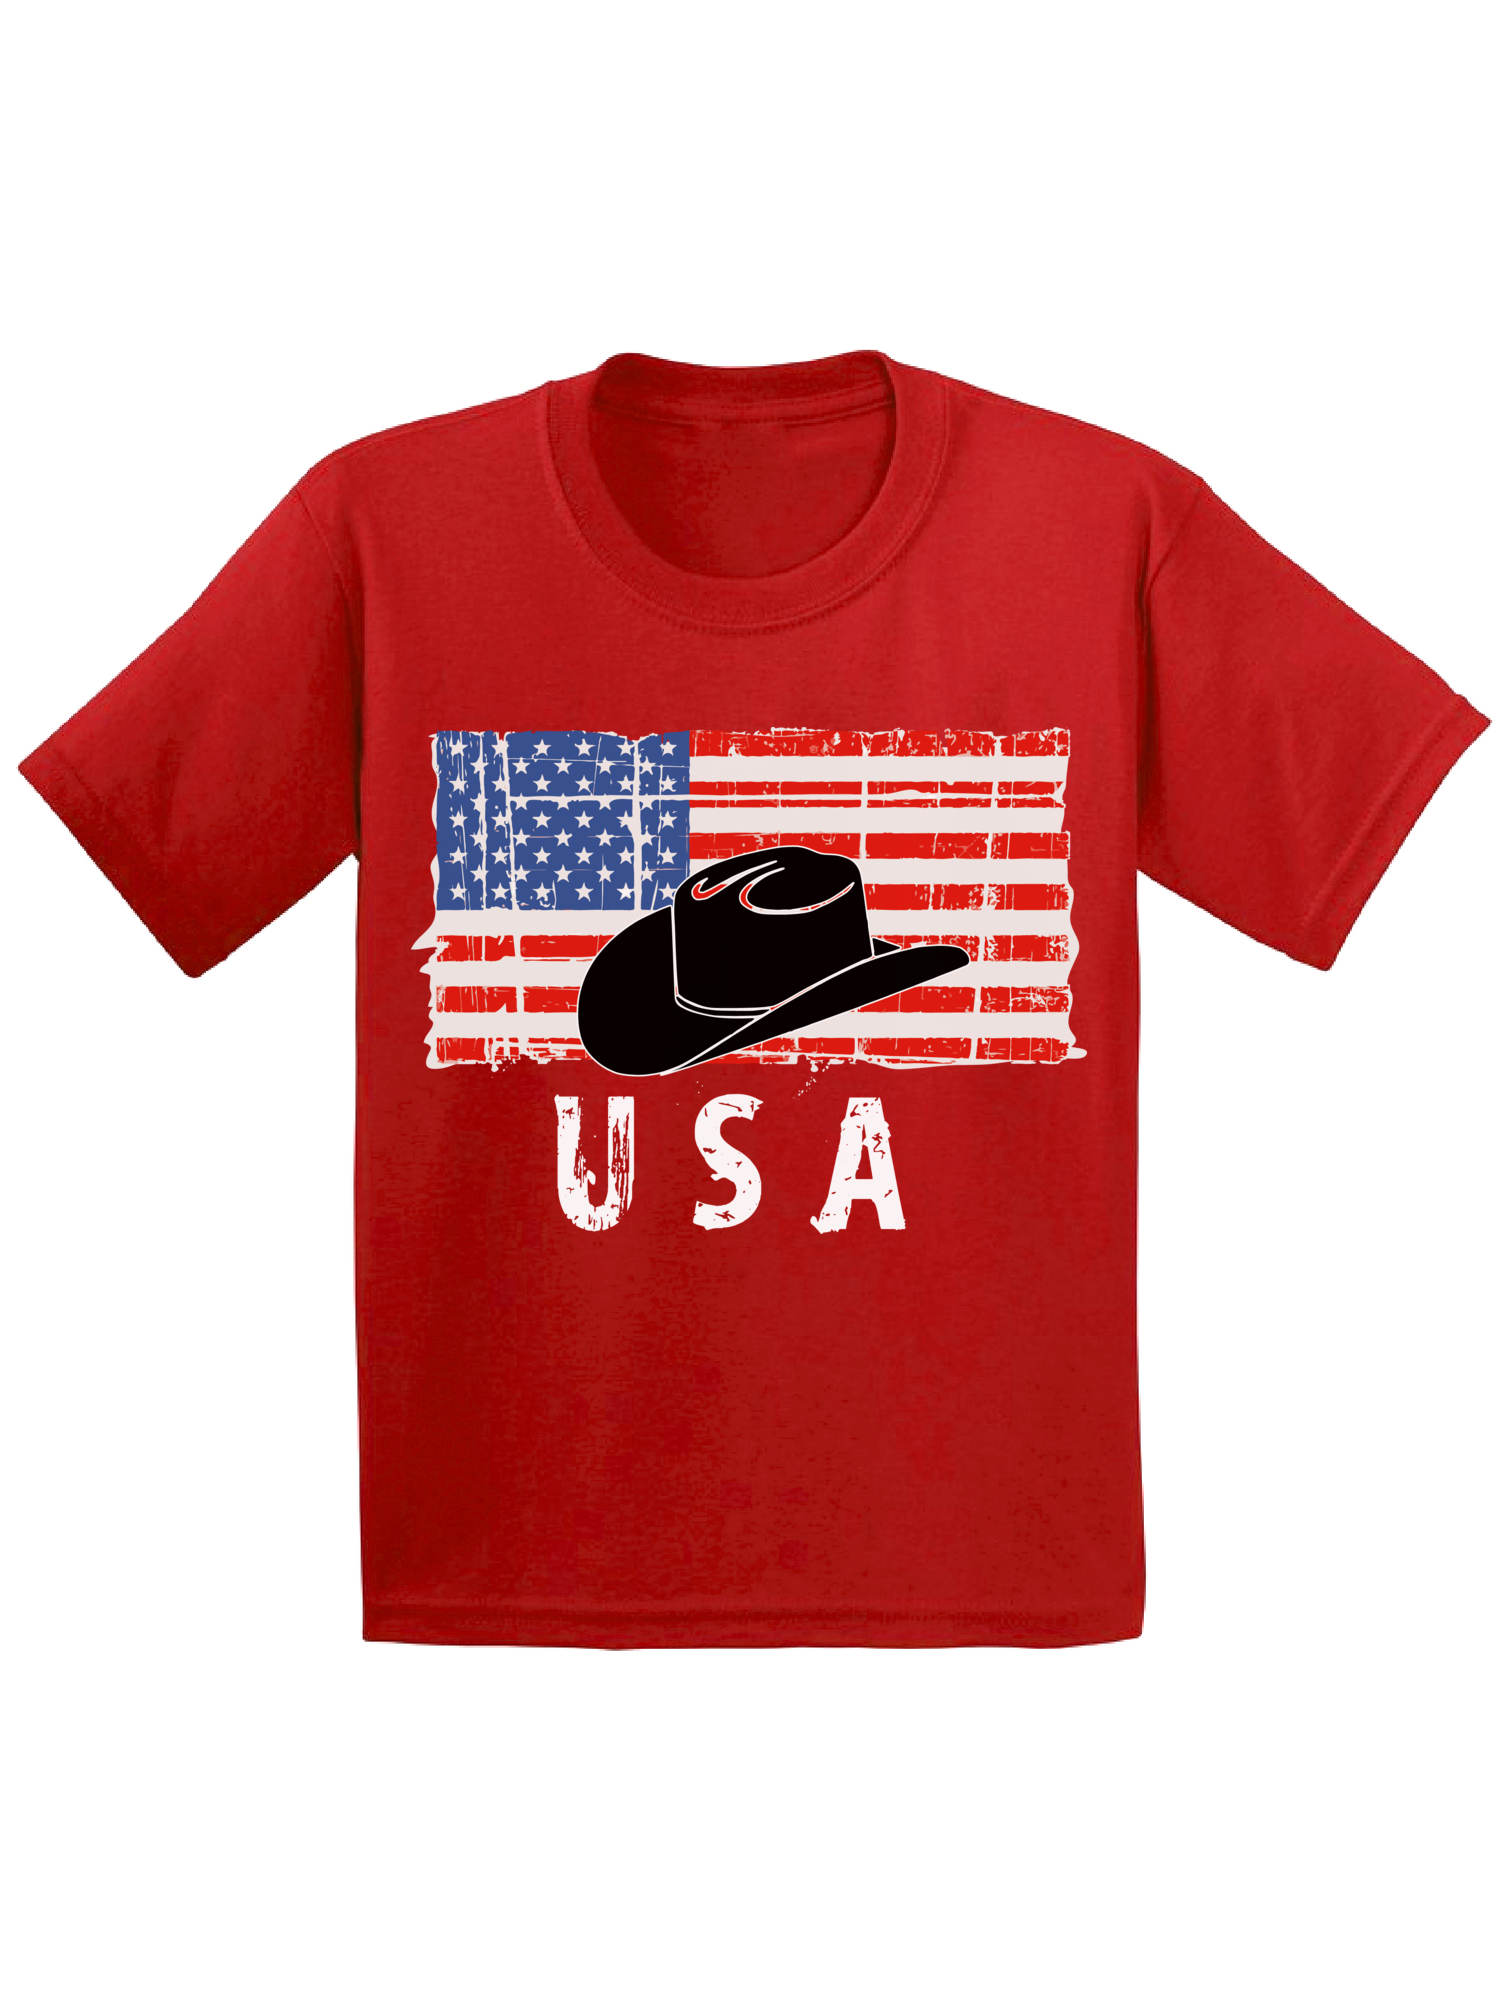 Awkward Styles Cowboy Hat USA Toddler Shirt United States Vintage USA Kids T shirt 4th of July Party Cowboy Hat Tshirt for Boys Love USA Cowboy Hat Tshirt for Girls Red White and Blue - image 1 of 4